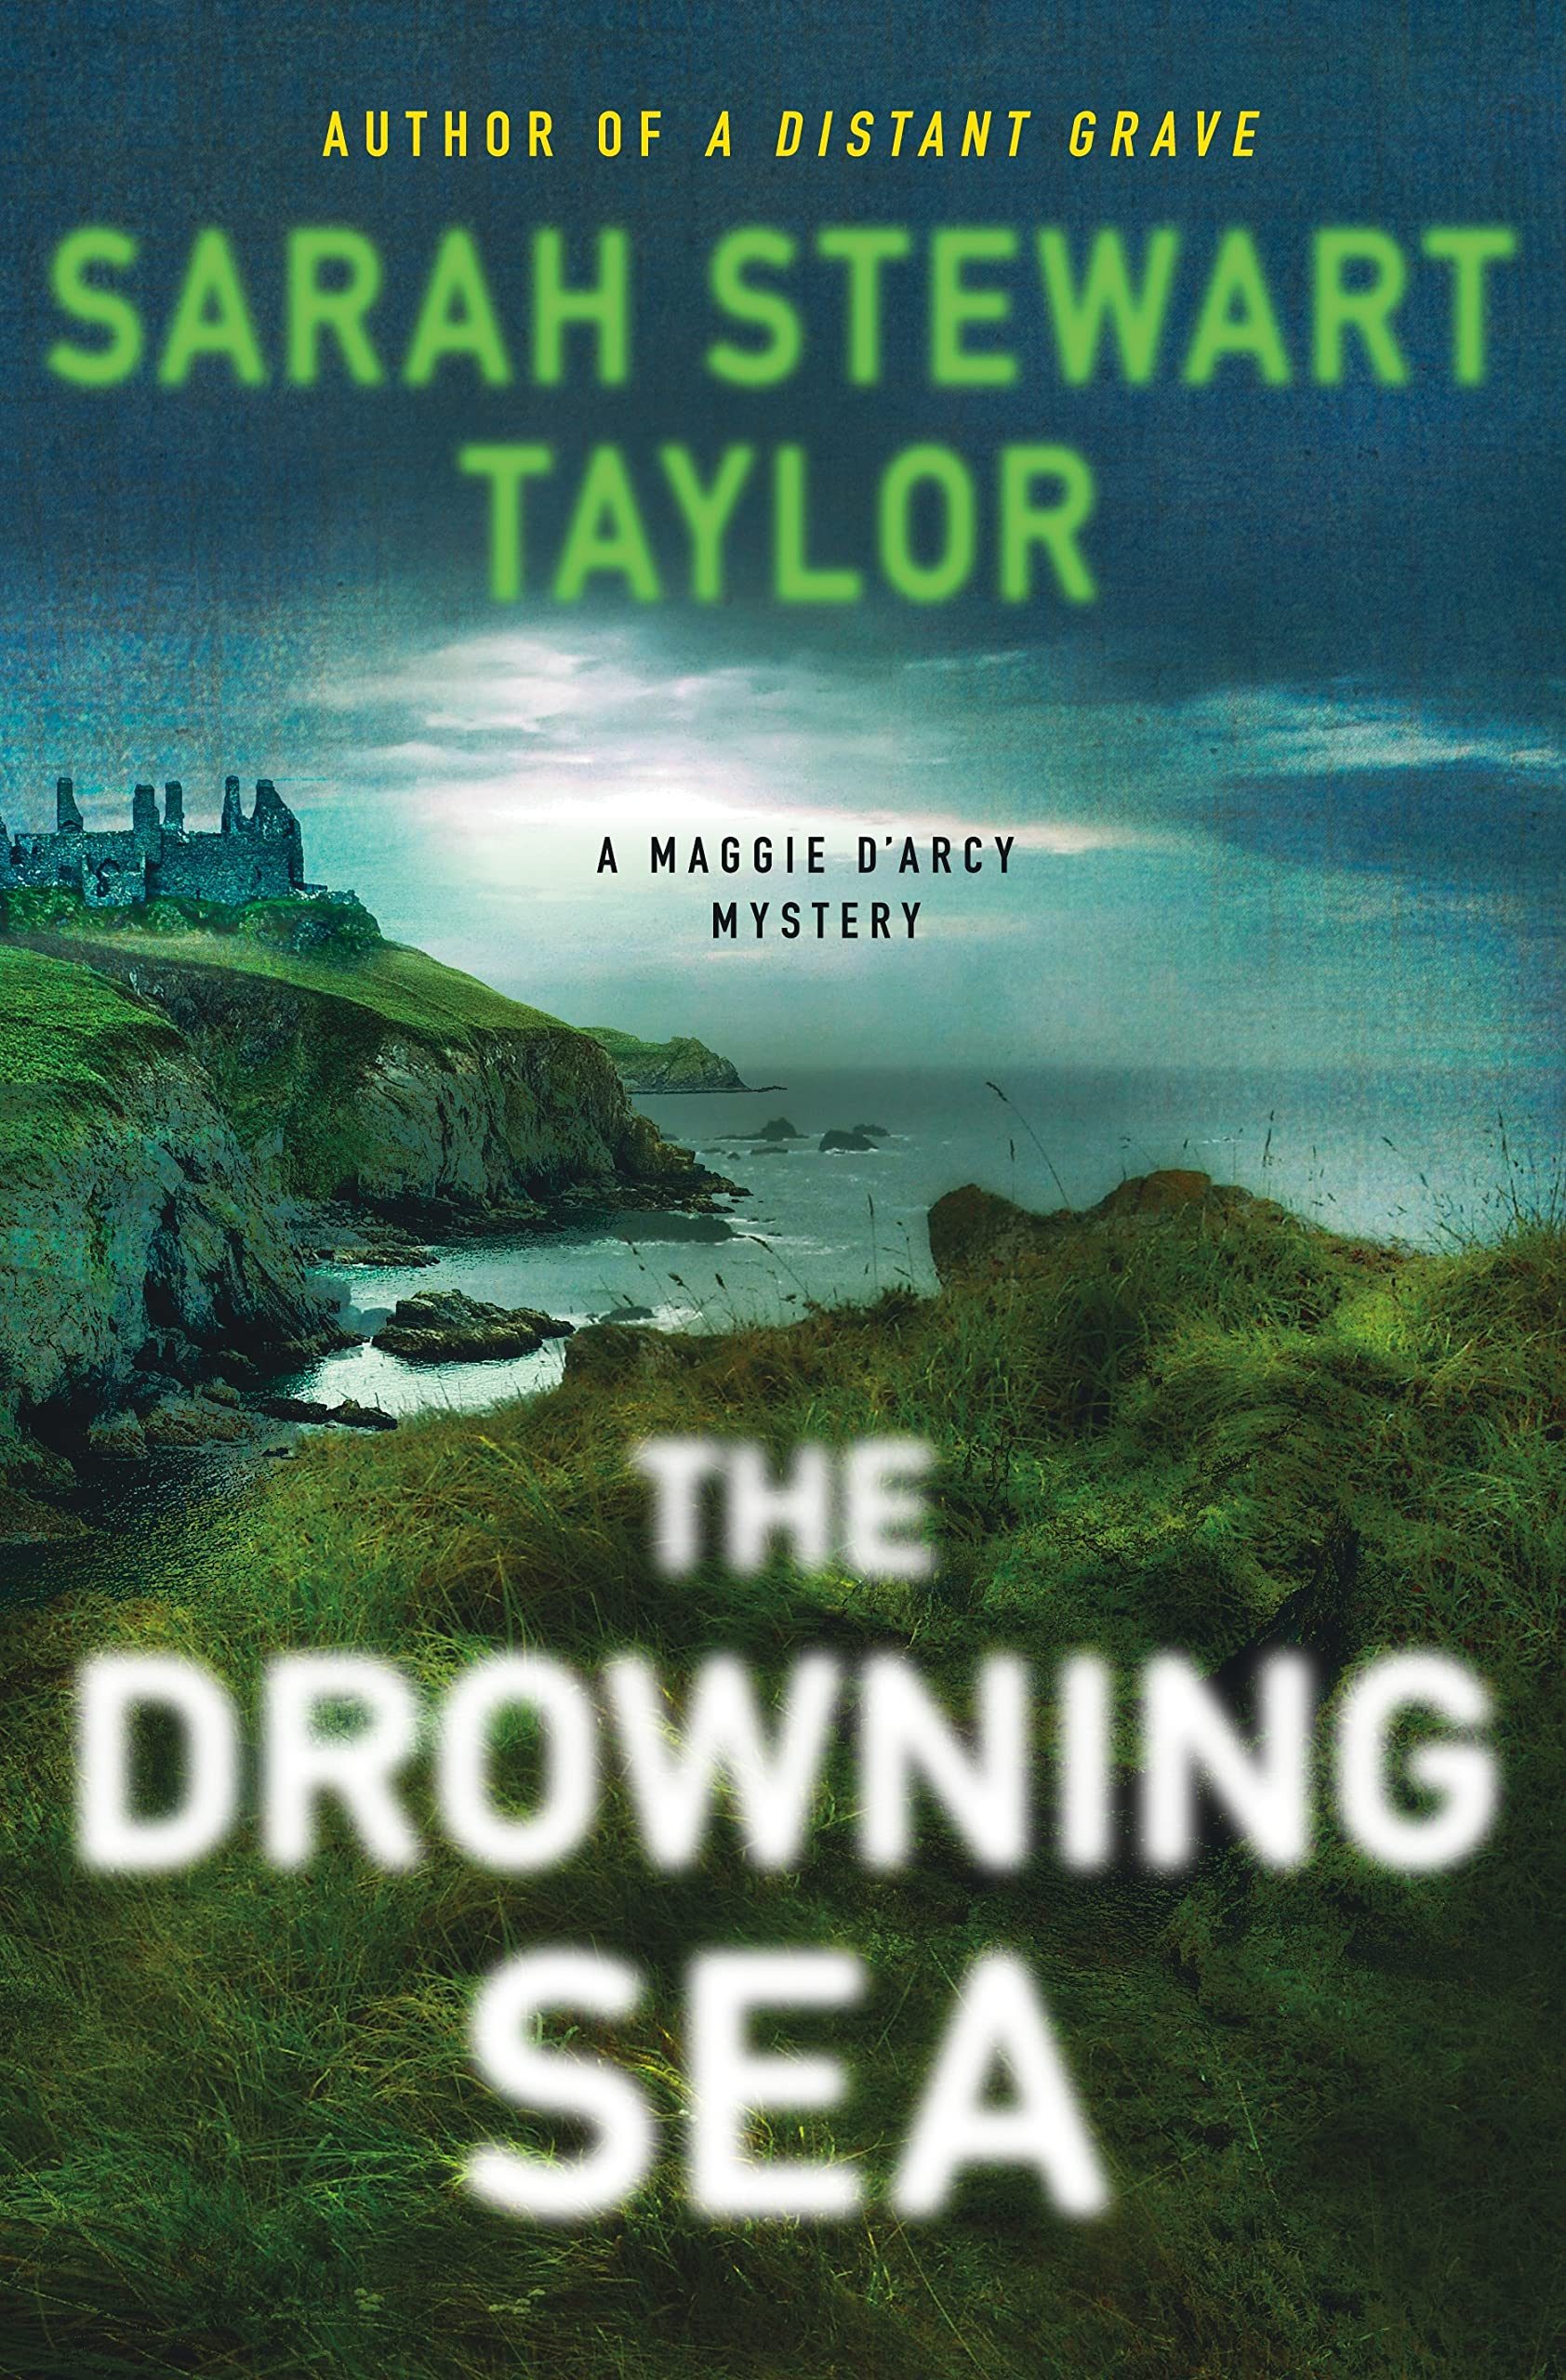 The Drowning Sea (Maggie D'arcy #3)